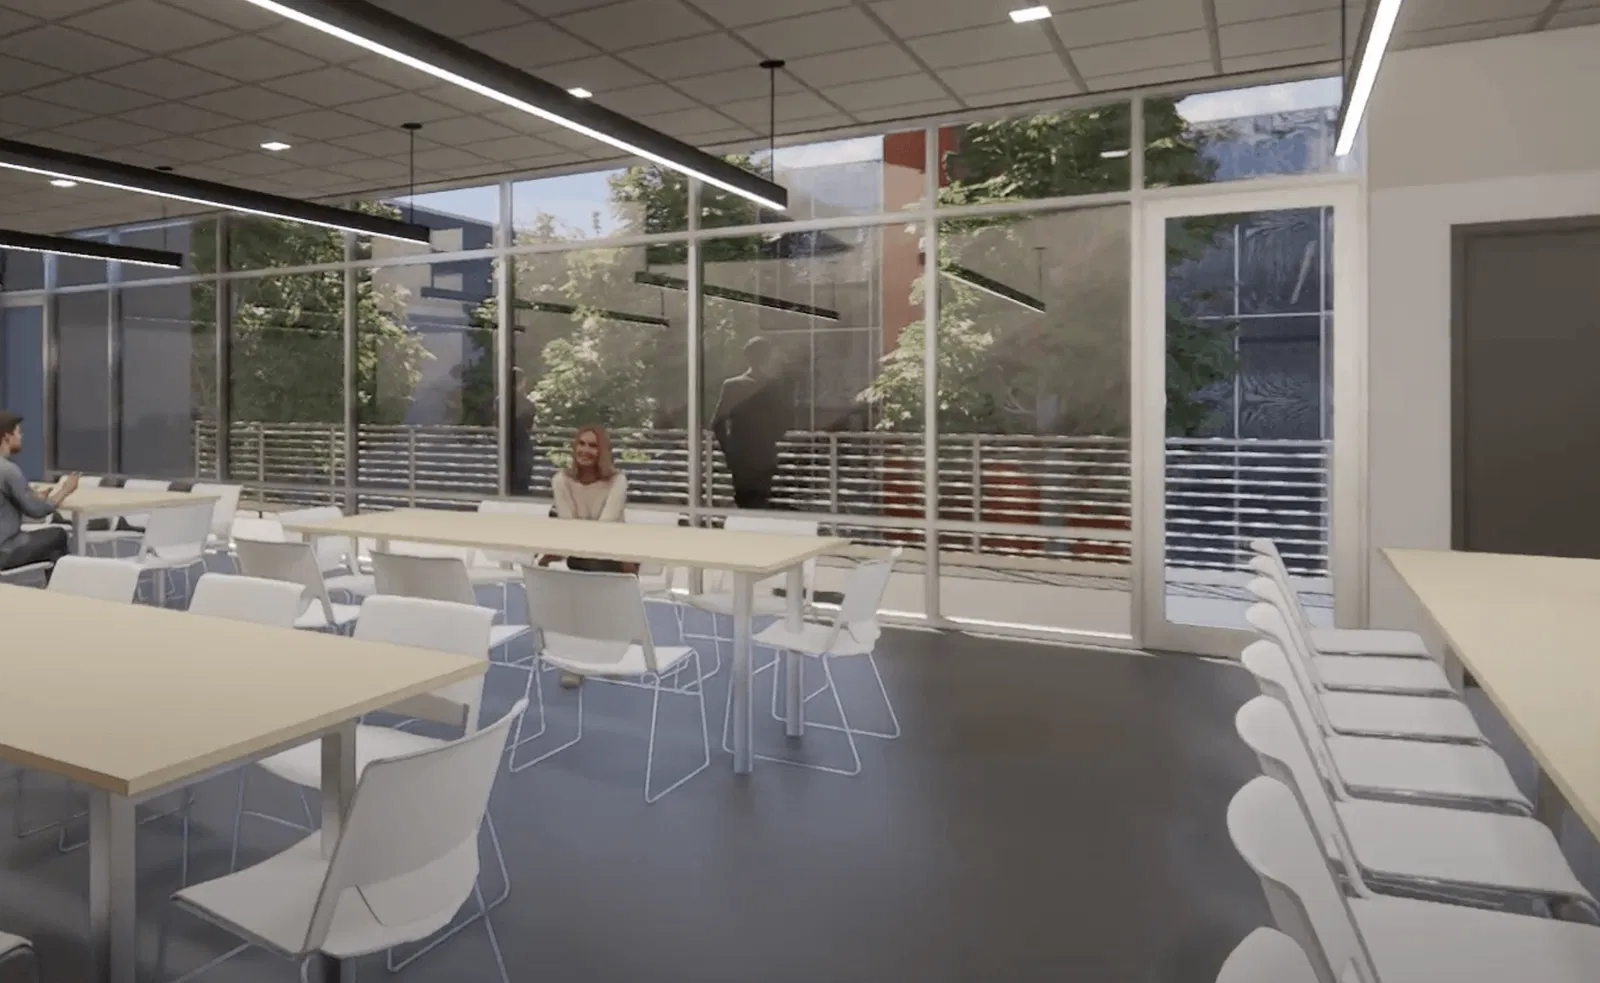 Dining room concept. Gray floor, panoramic windows, and long white tables for 8 people